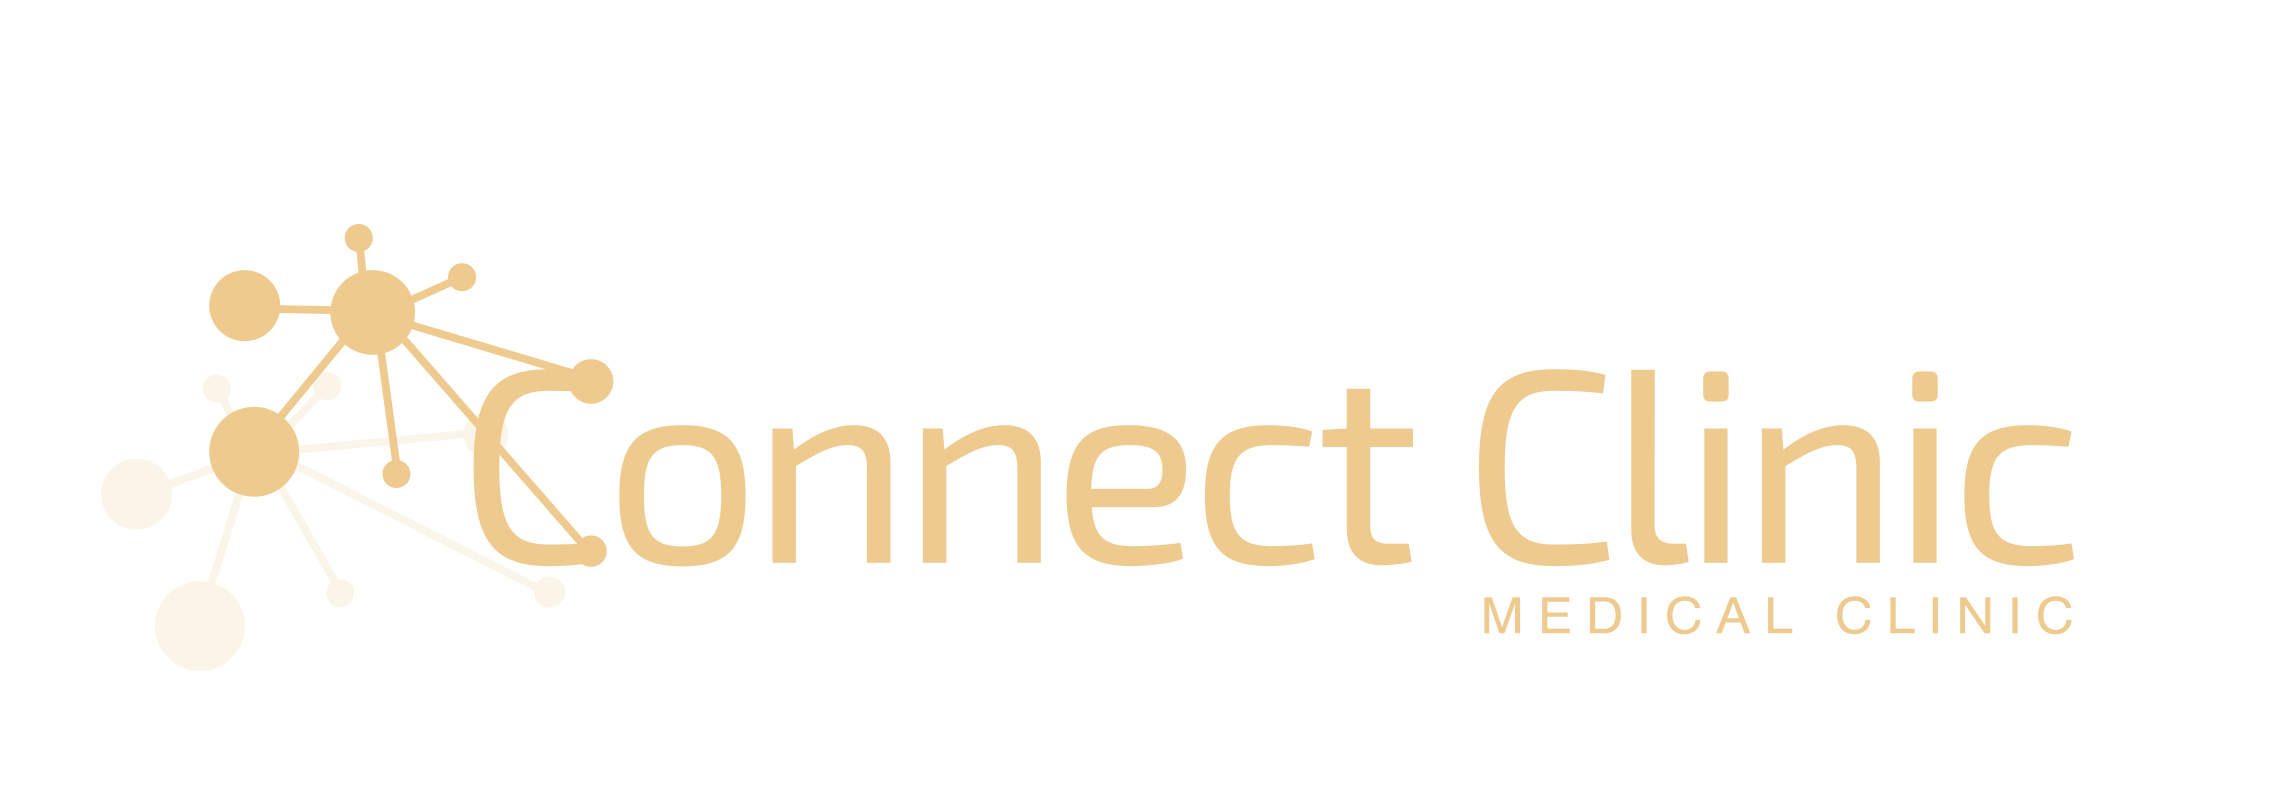 The Connect Clinic - Logo